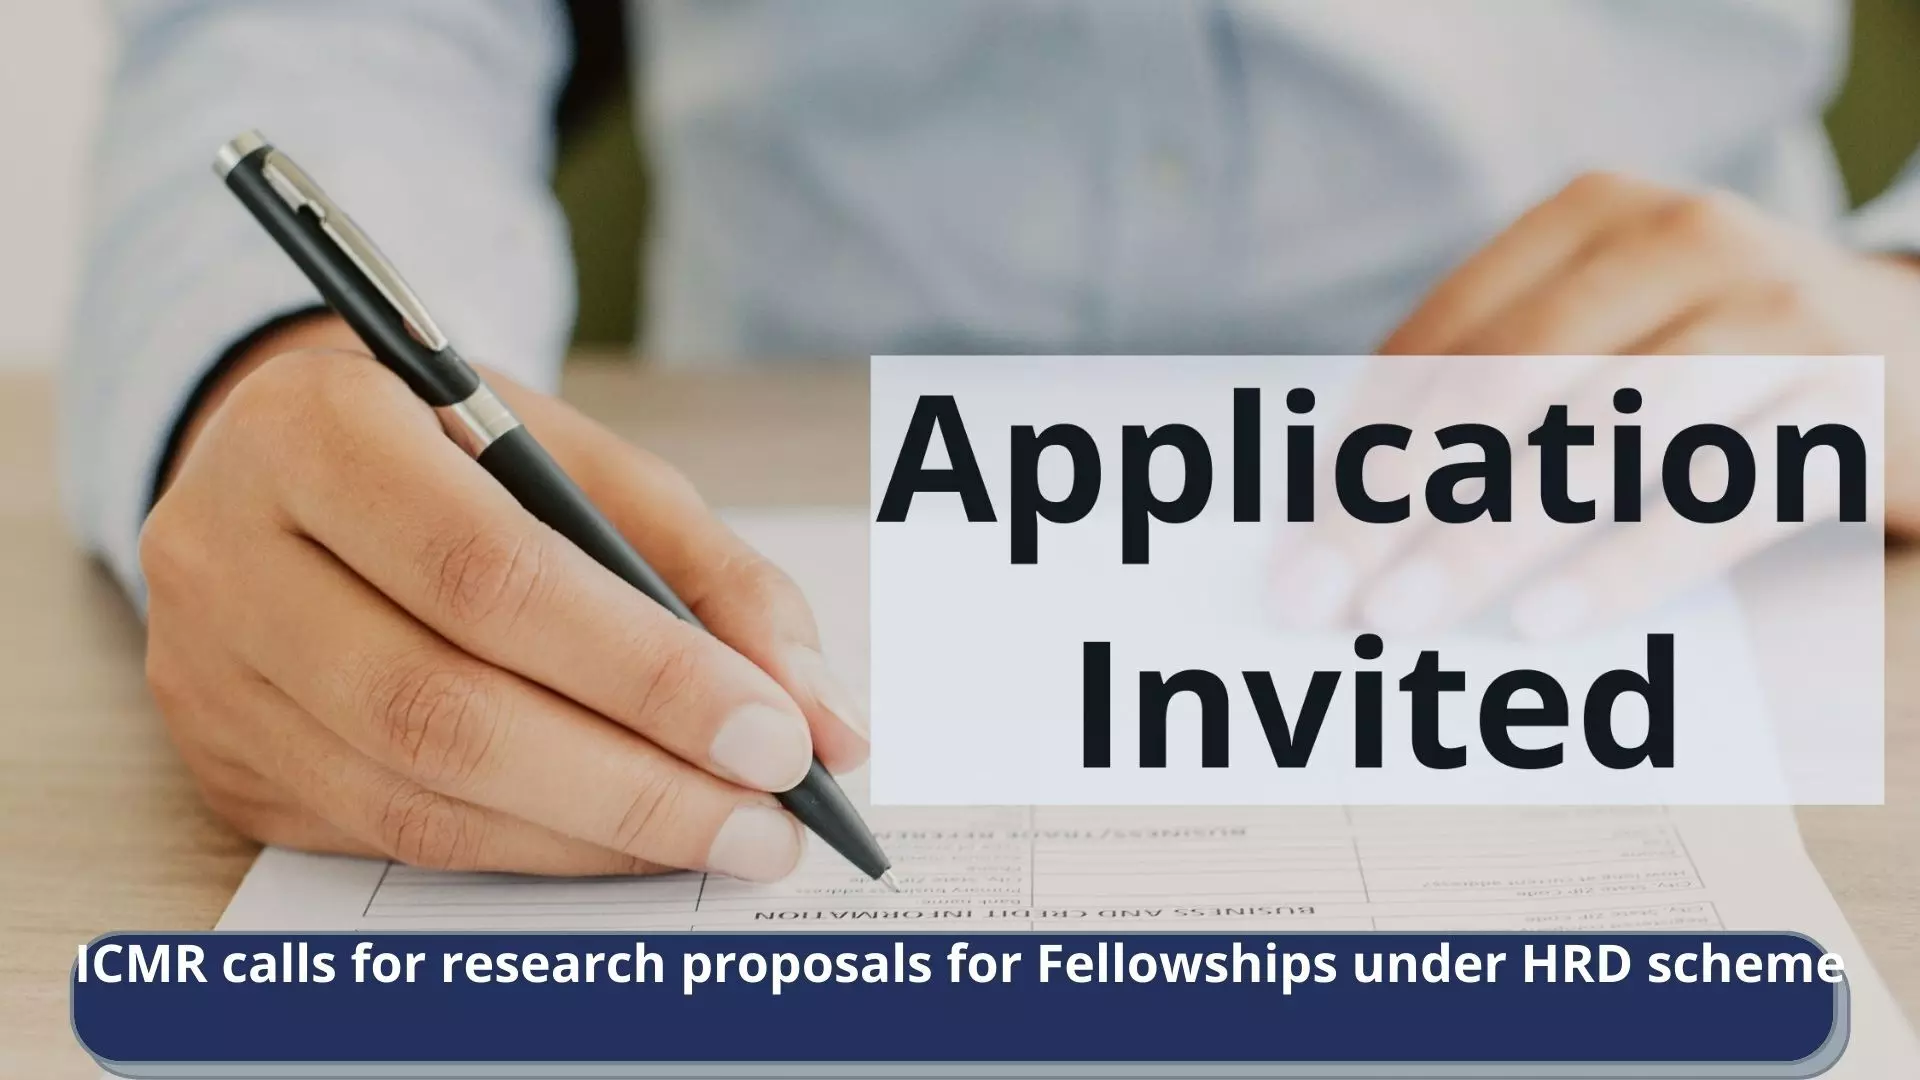 ICMR calls for research proposals for Fellowships under HRD scheme, details